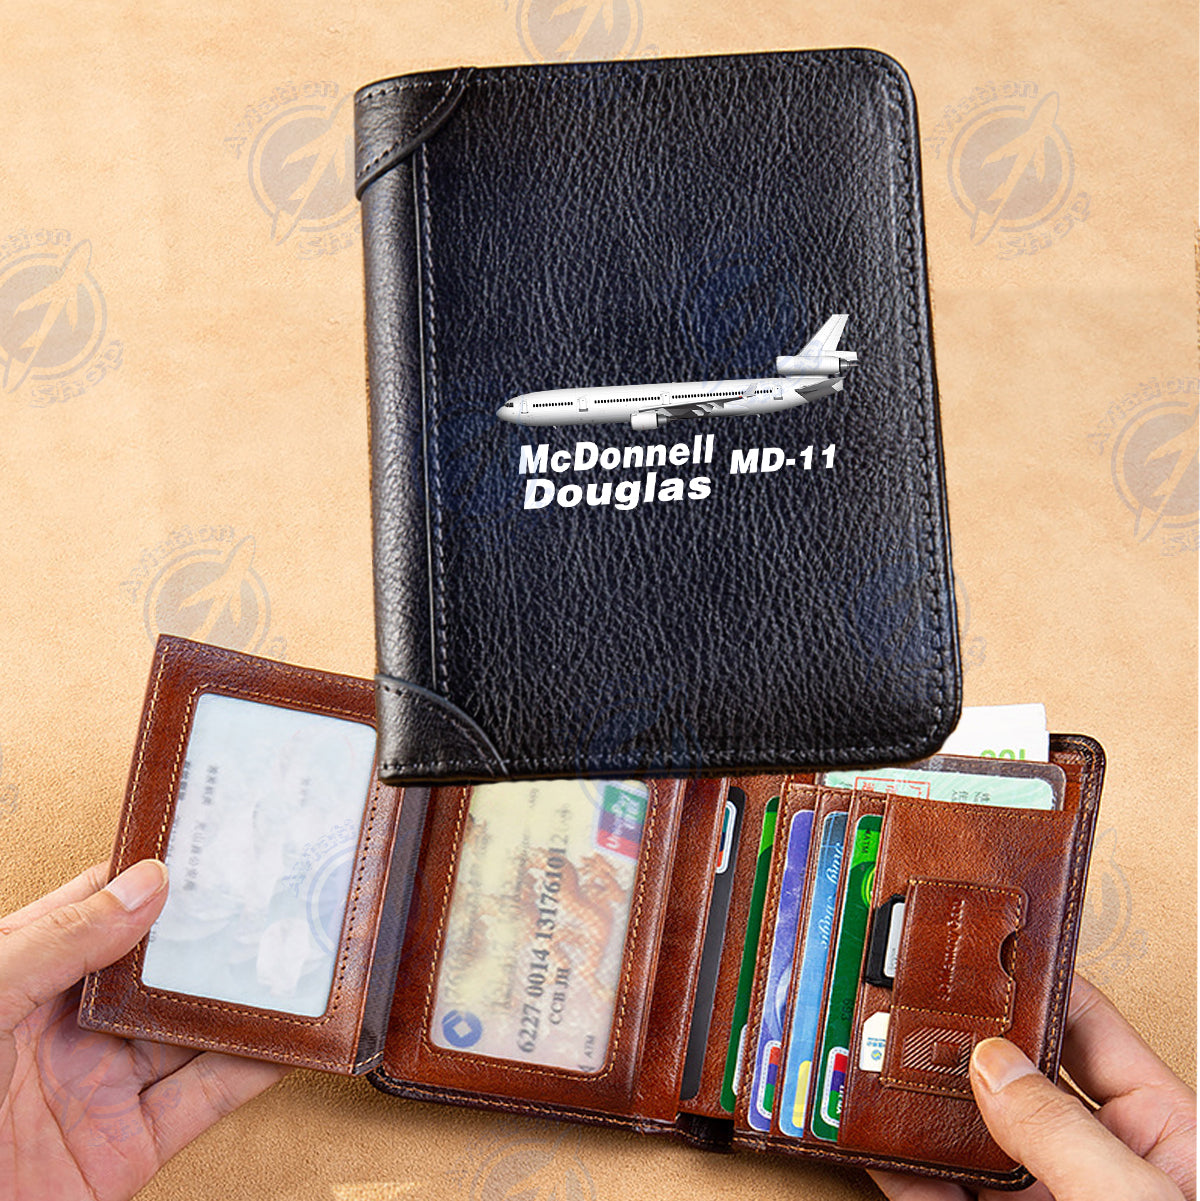 The McDonnell Douglas MD-11 Designed Leather Wallets